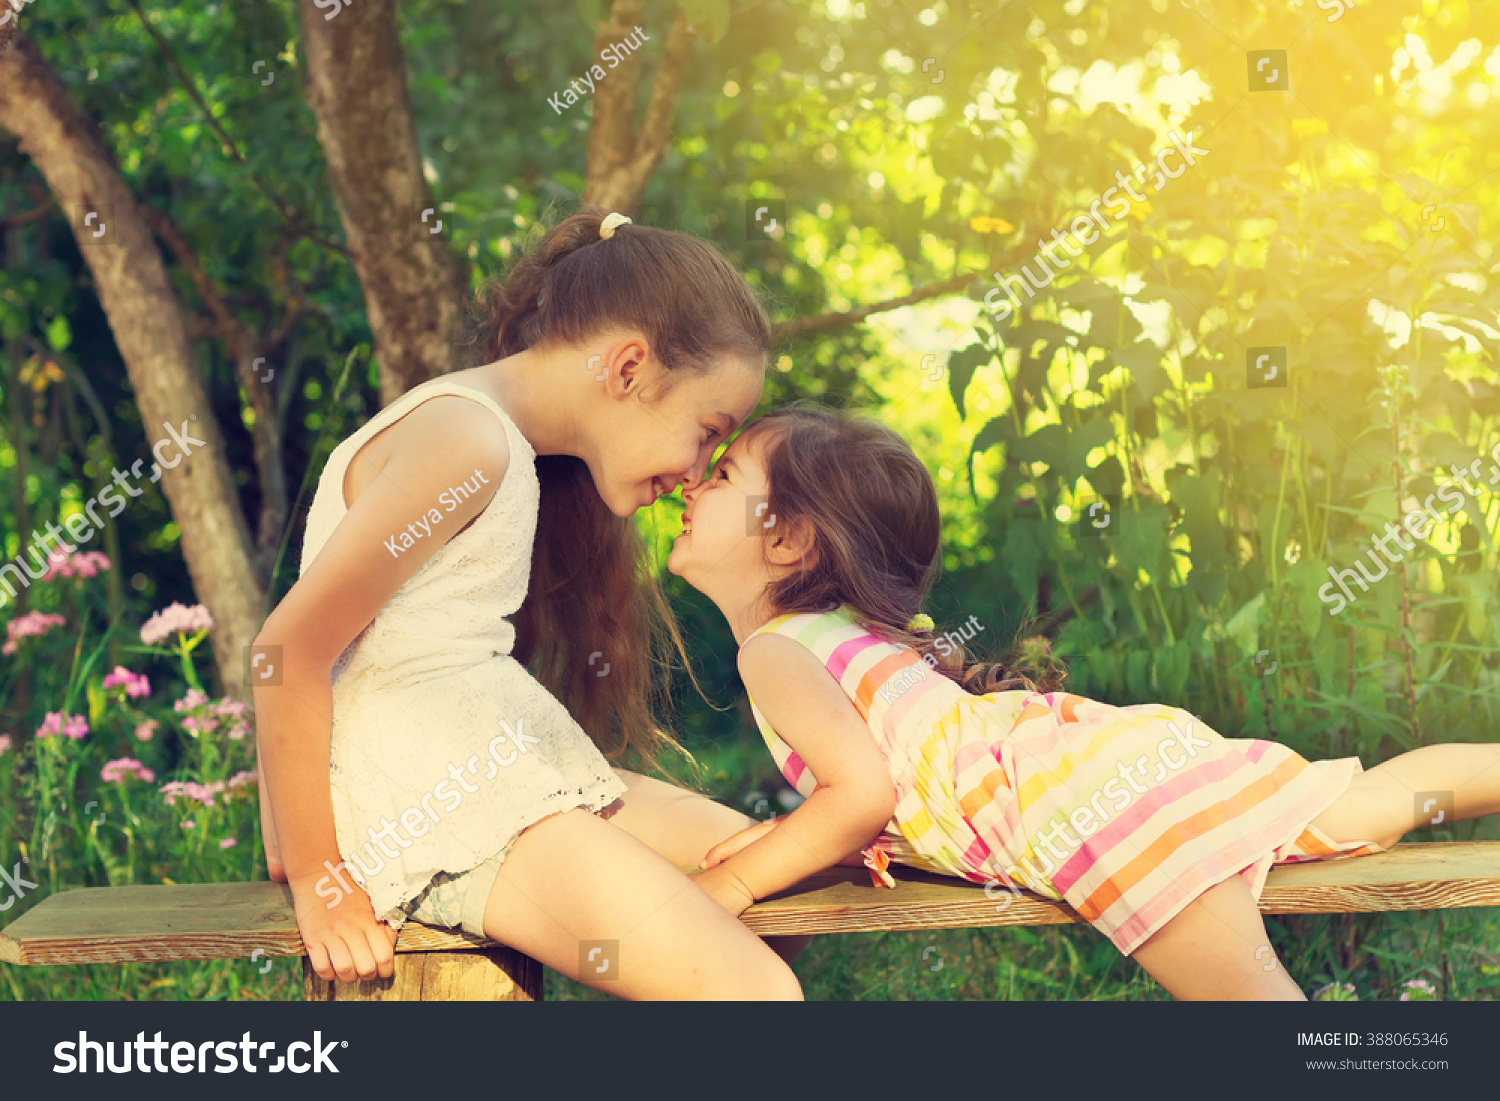 Toned portrait of two cute little girls smiling and playing at the garden #388065346